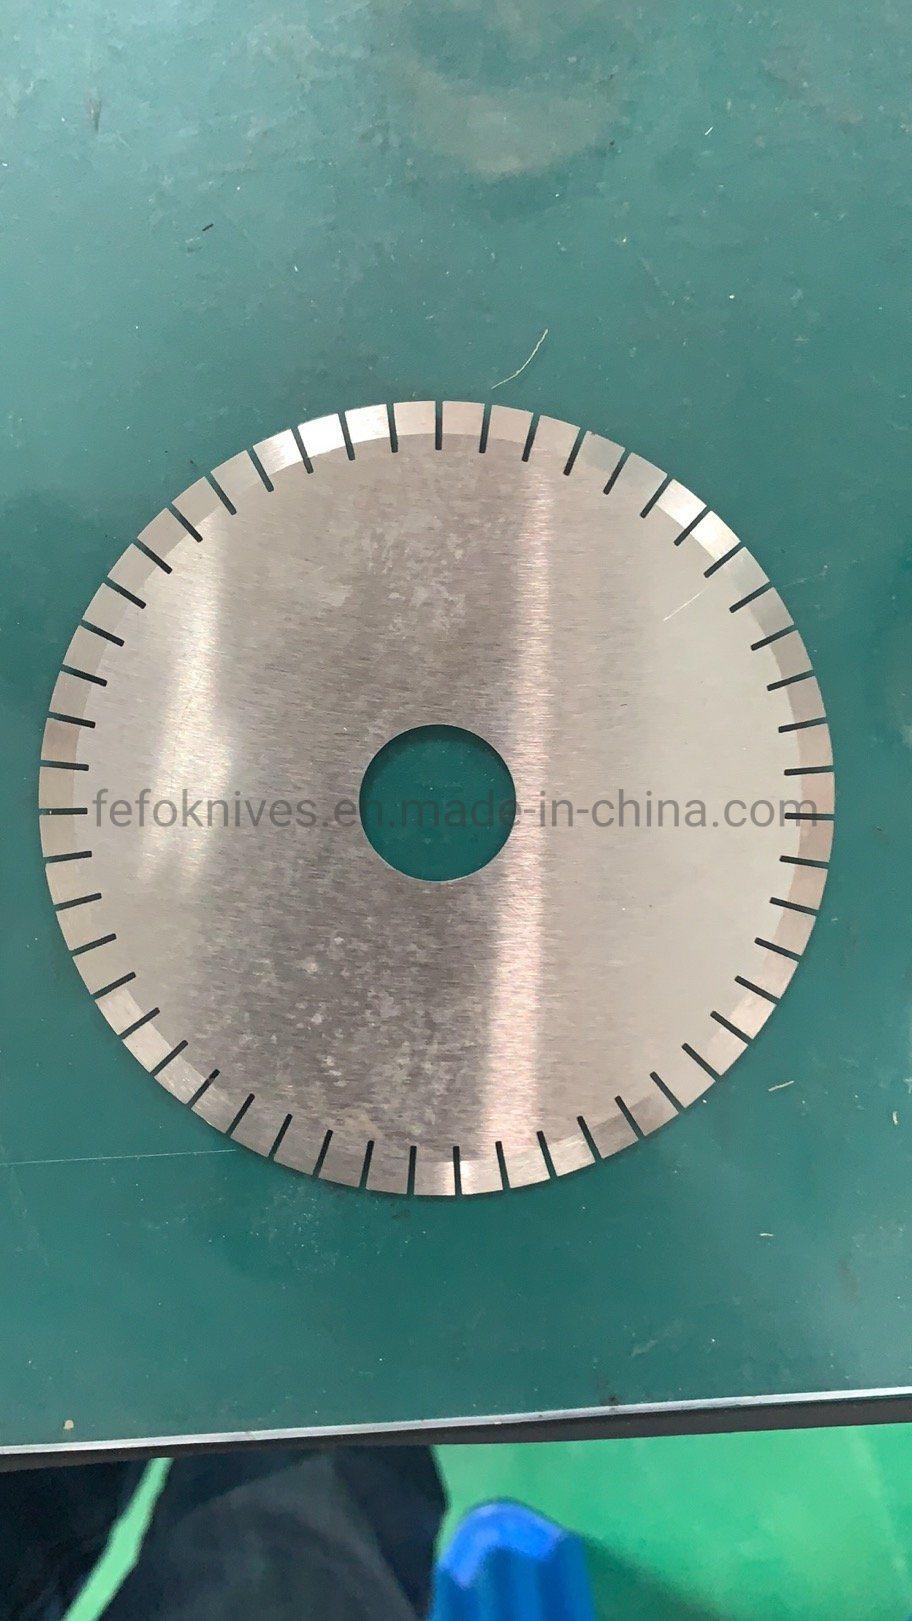 China Factory Supply Machine Knives for All Types of Cutting Machines